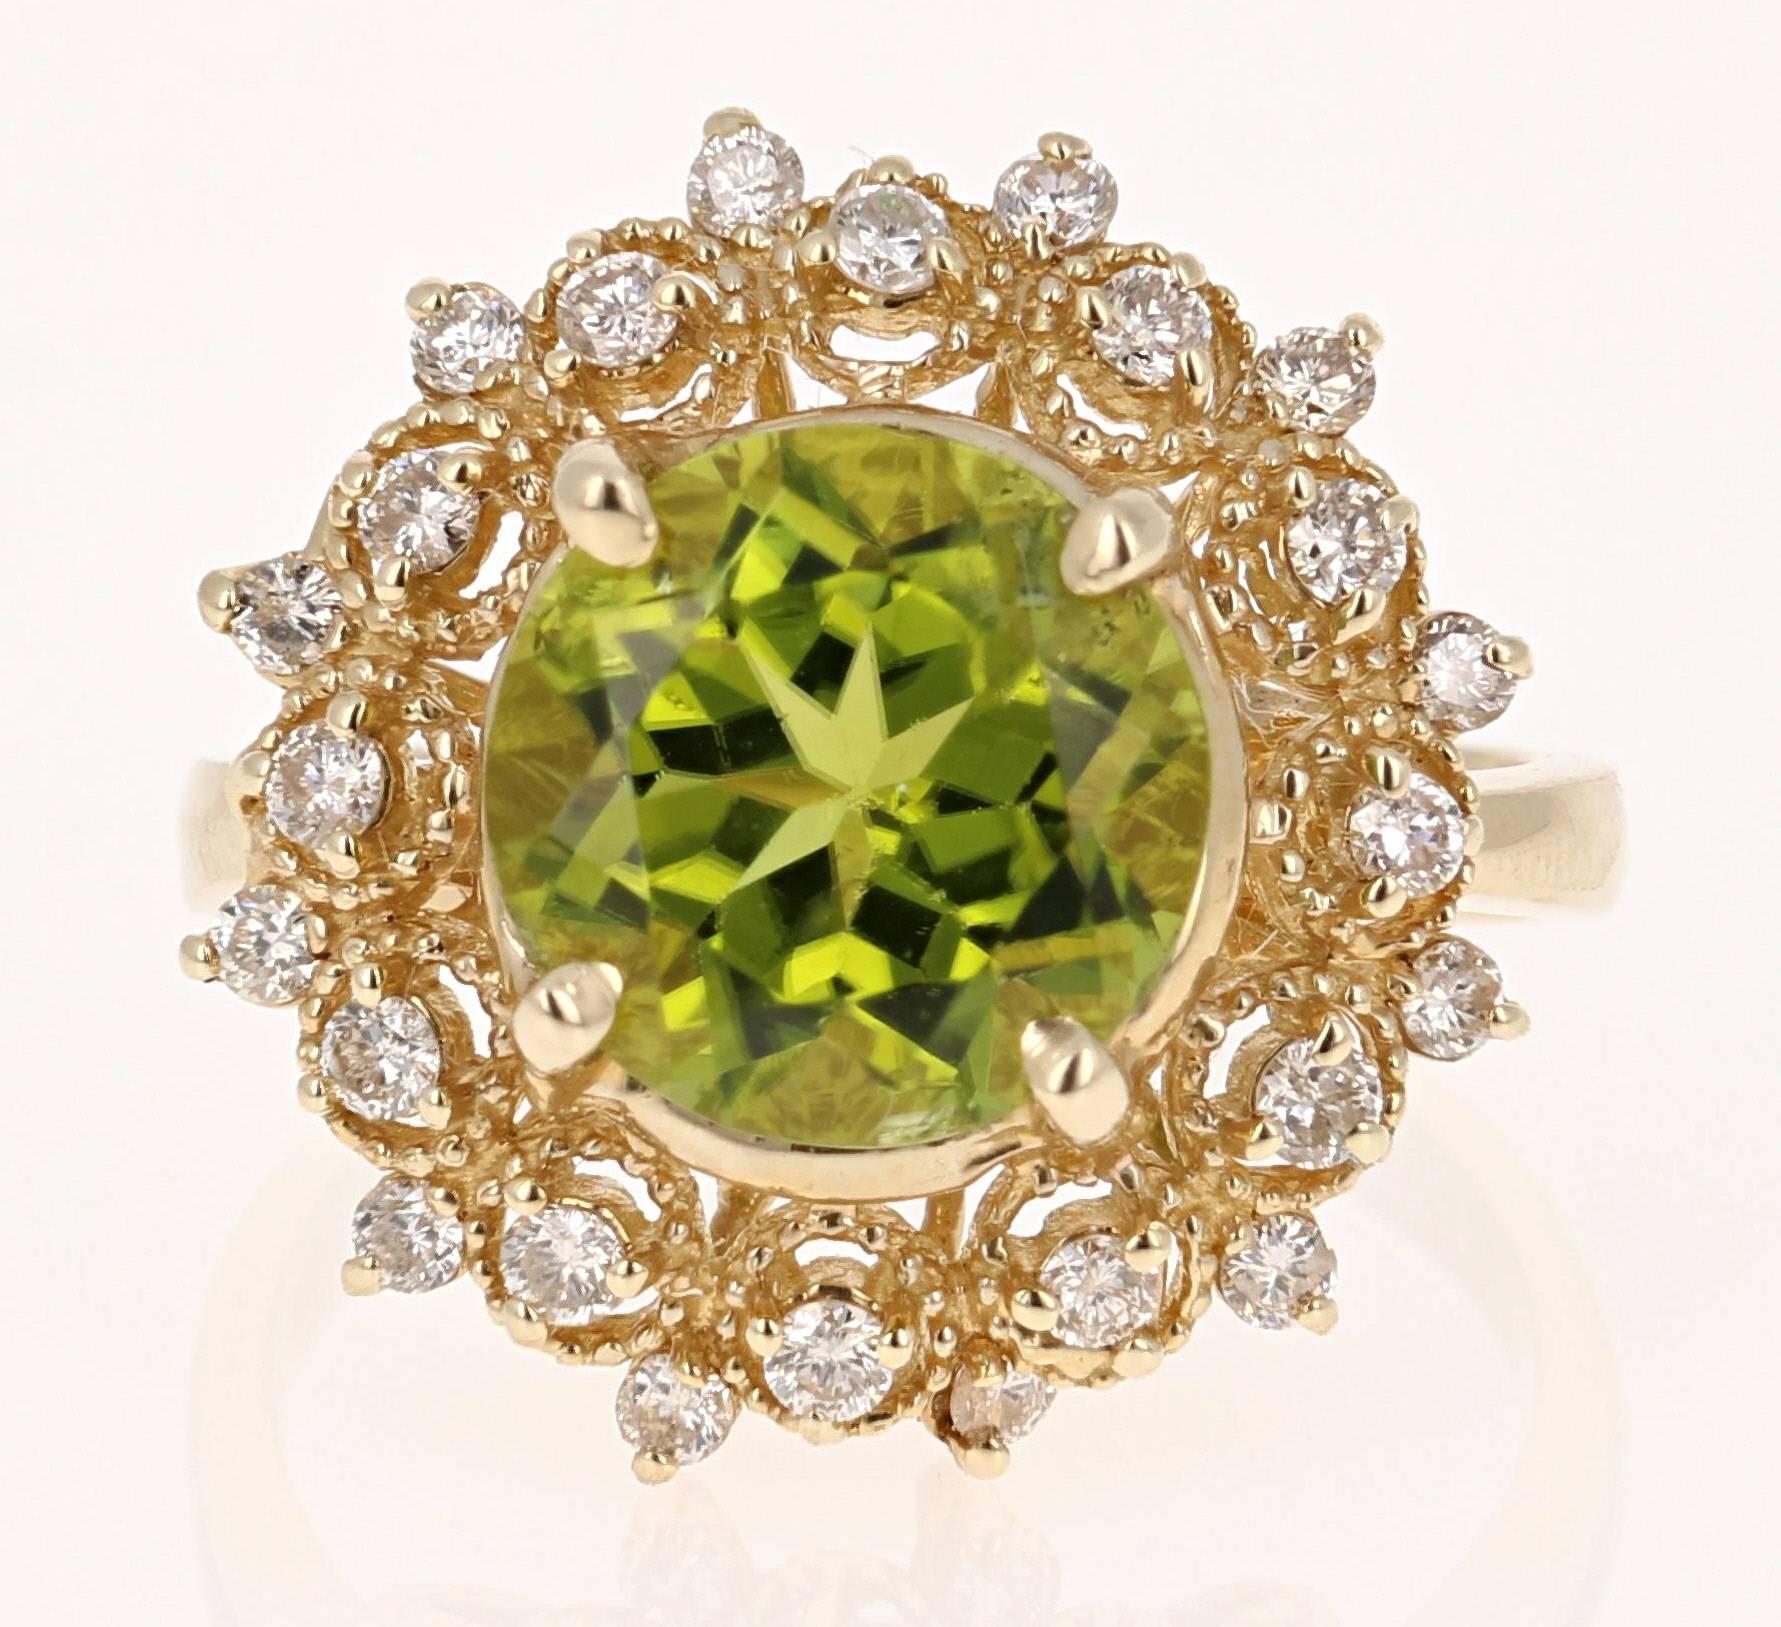 This beautiful ring has a large Round Cut Peridot in the center that weighs 4.07 carats. The ring is surrounded by 24 Round Cut Diamonds that weigh 0.67 carat.  The total carat weight of this ring is 4.74 carats. The antique and vintage style